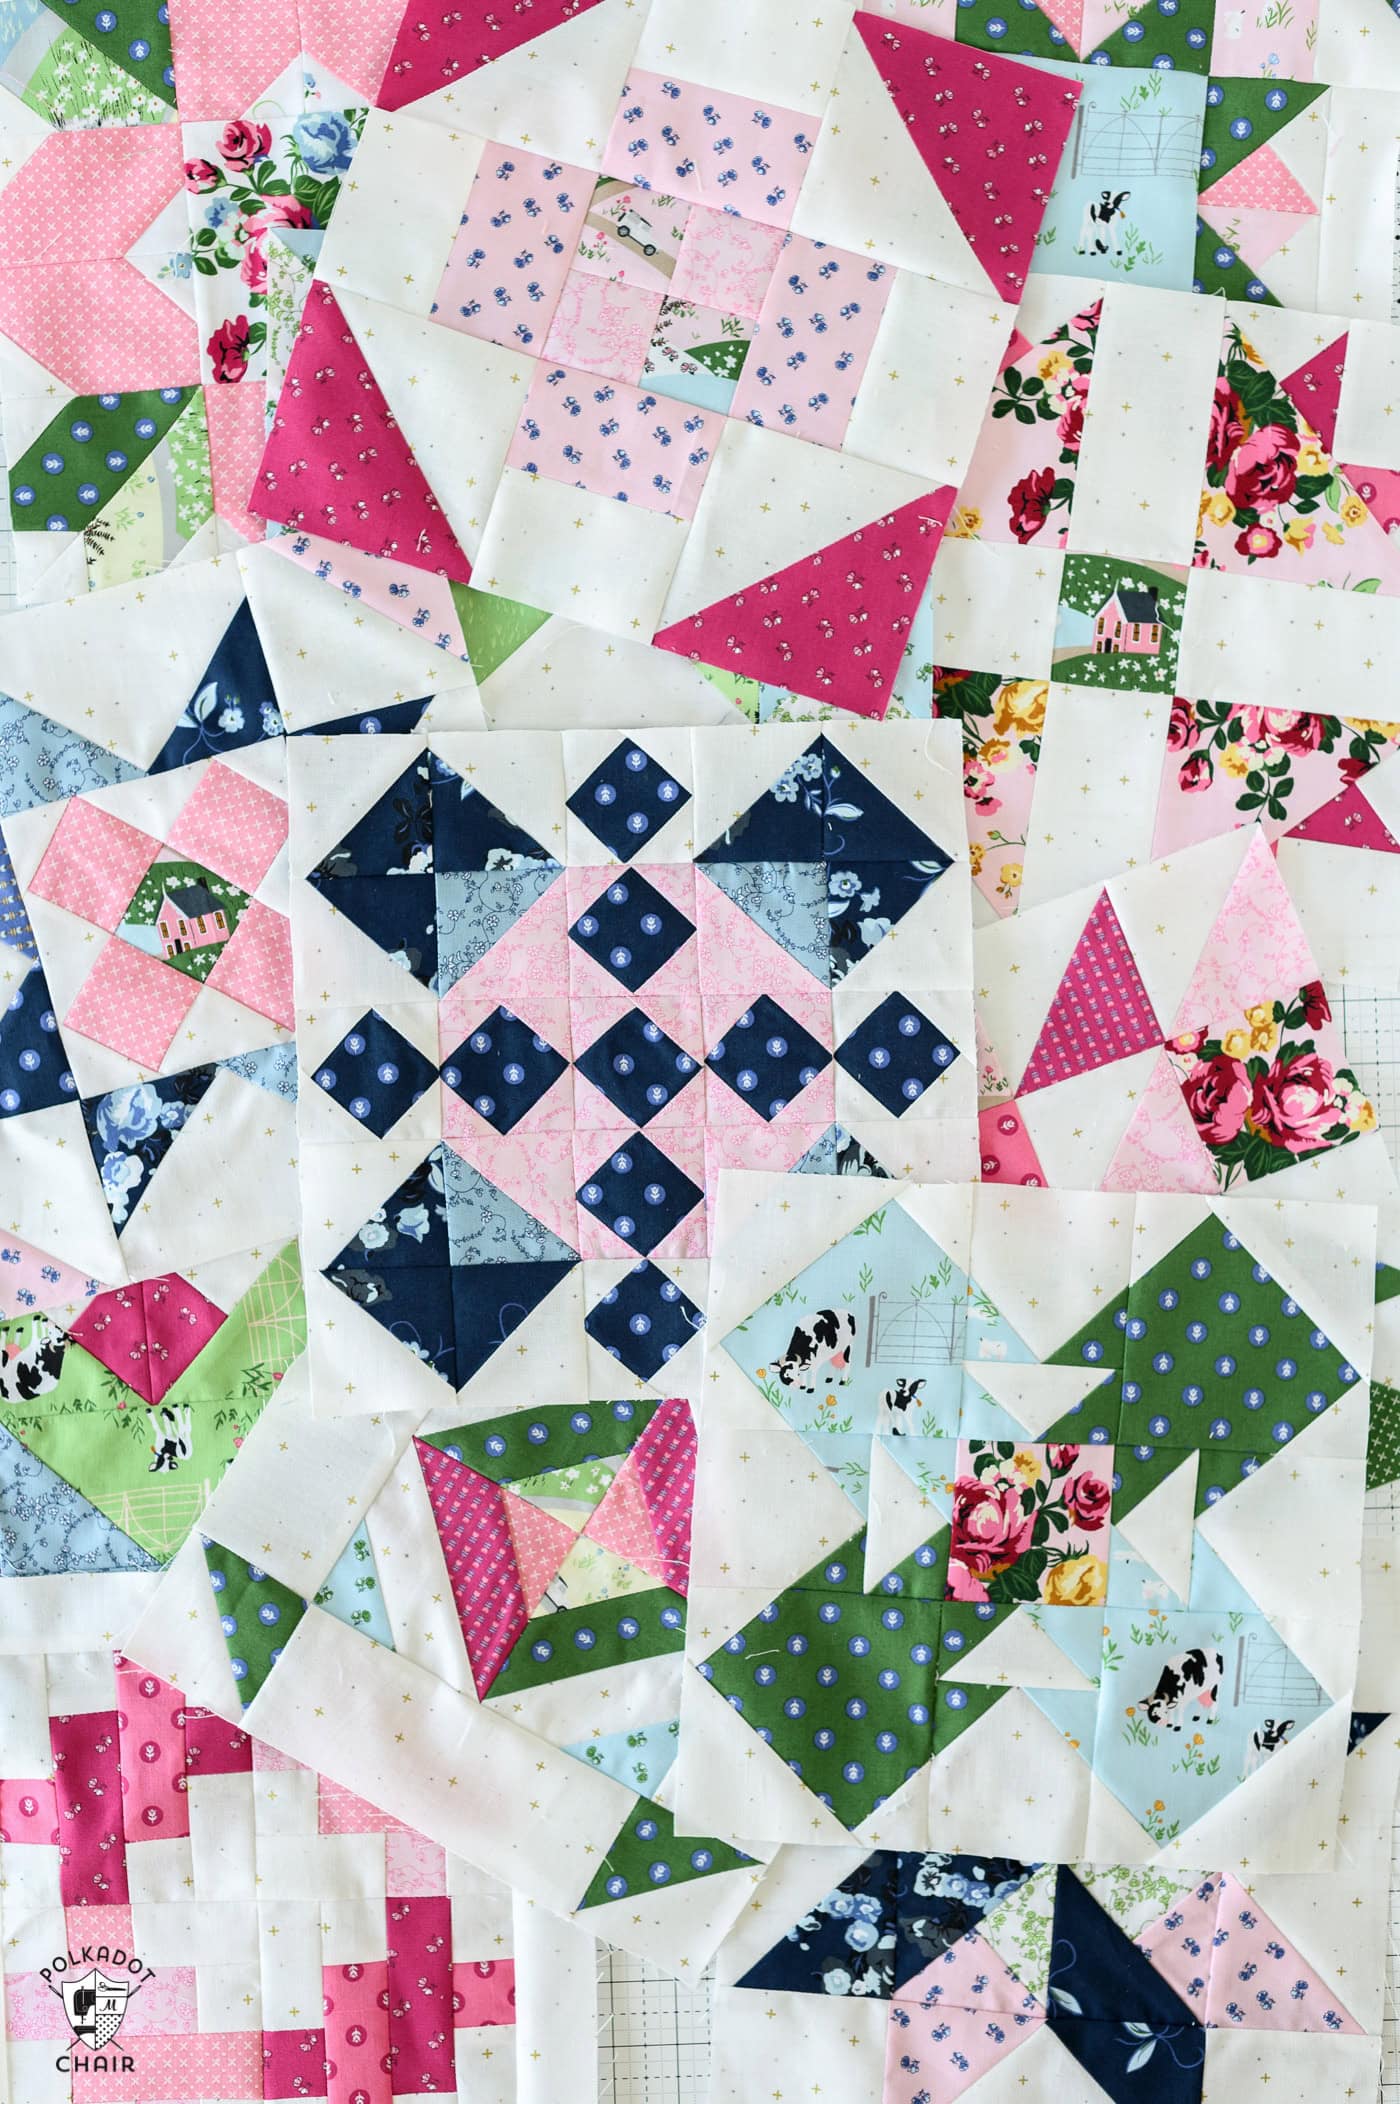 several colorful quilt blocks scattered on white table